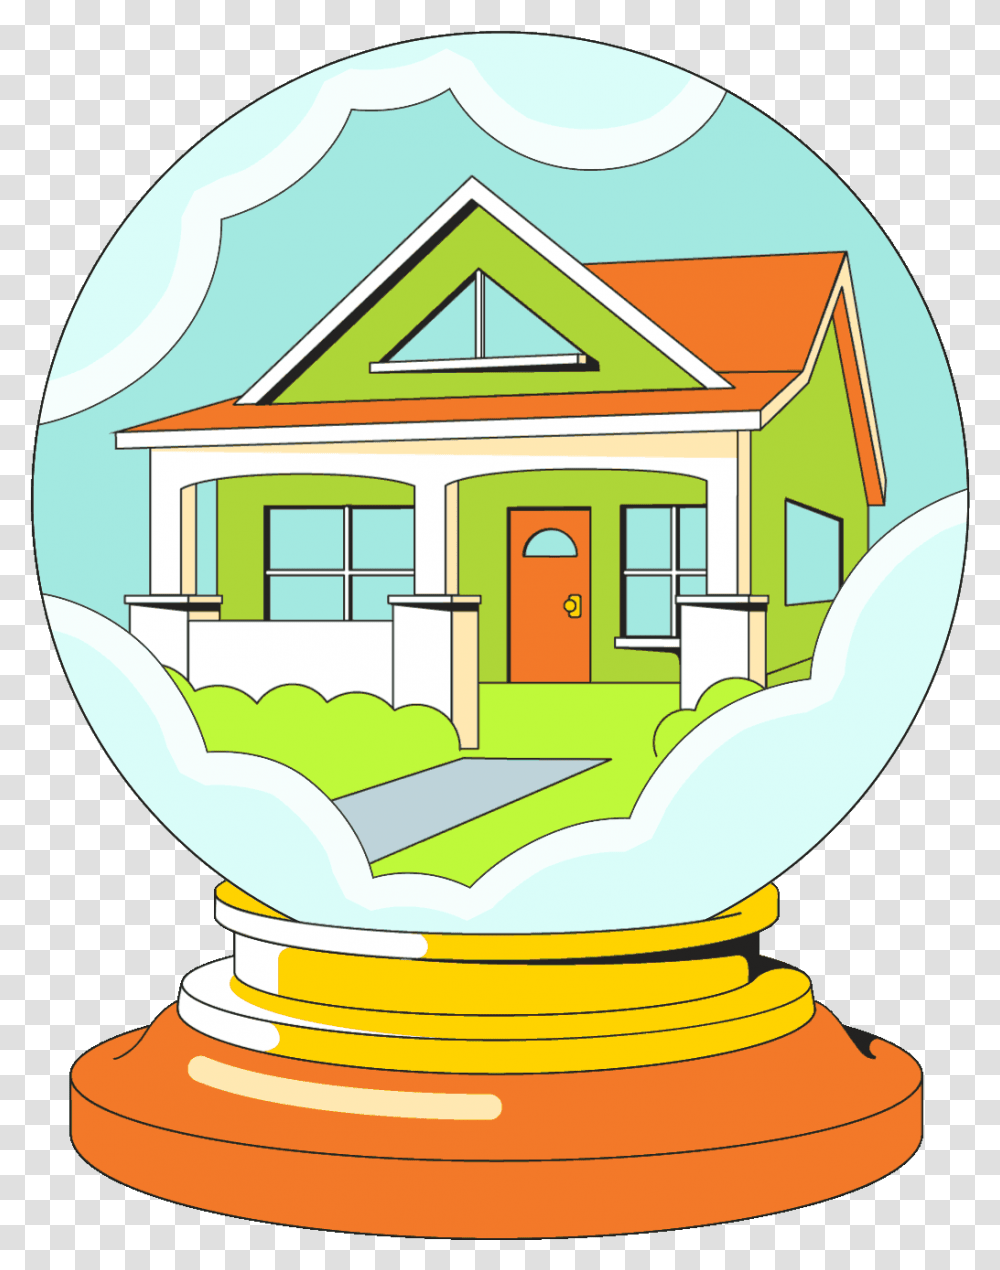 Best Nightmare Before Christmas Halloween Decorations 2021 Vertical, Housing, Building, House, Cabin Transparent Png